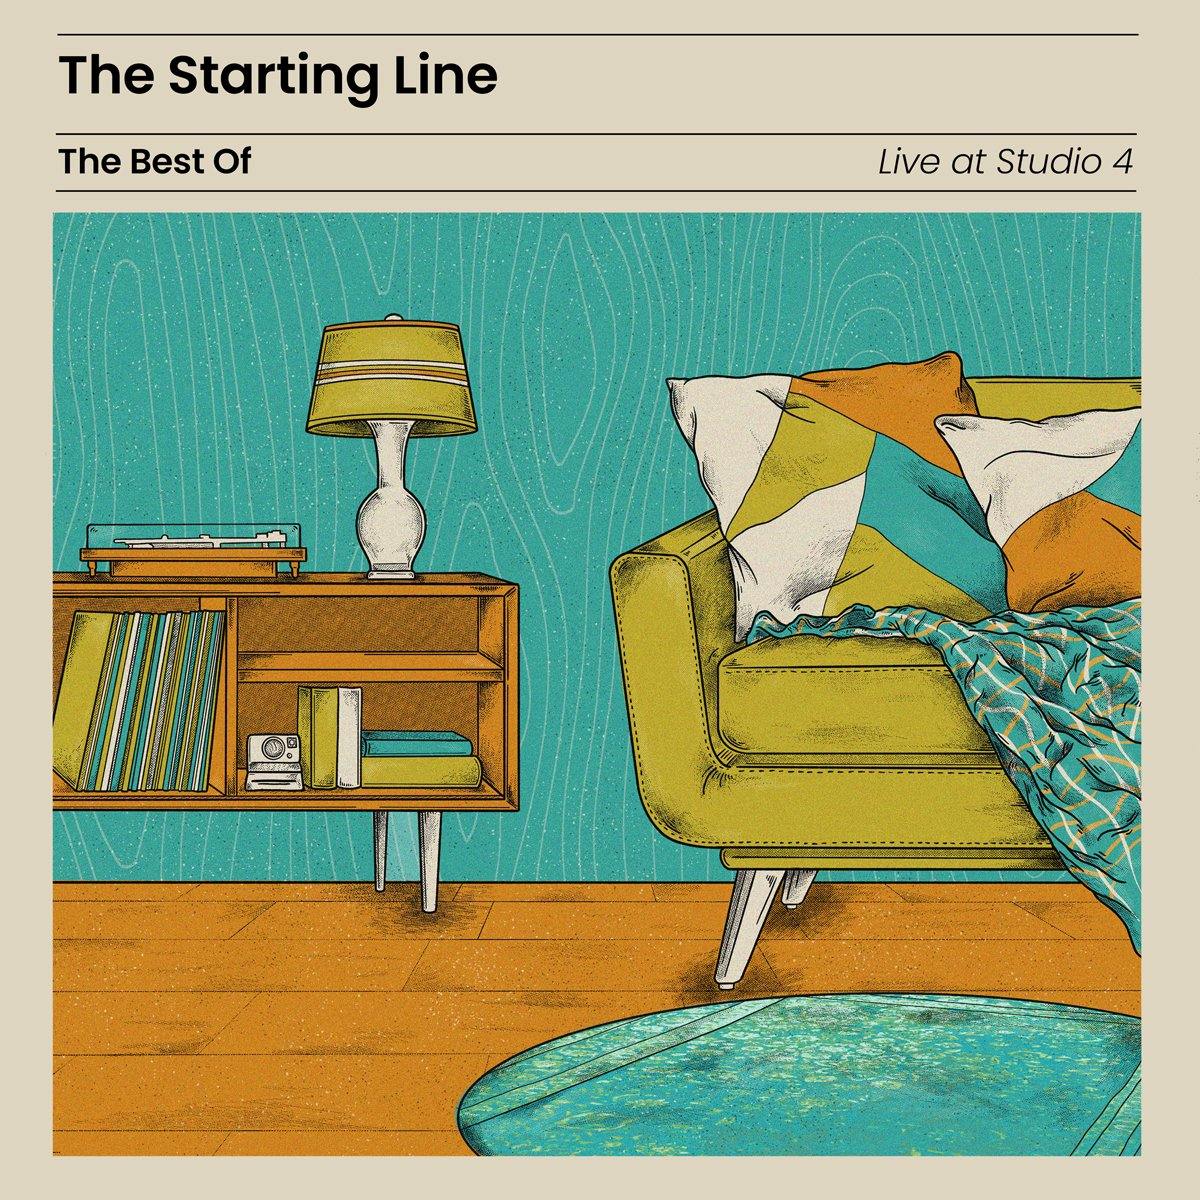 Buy – The Starting Line "The Best Of: Live at Studio 4" 2x12" – Band & Music Merch – Cold Cuts Merch